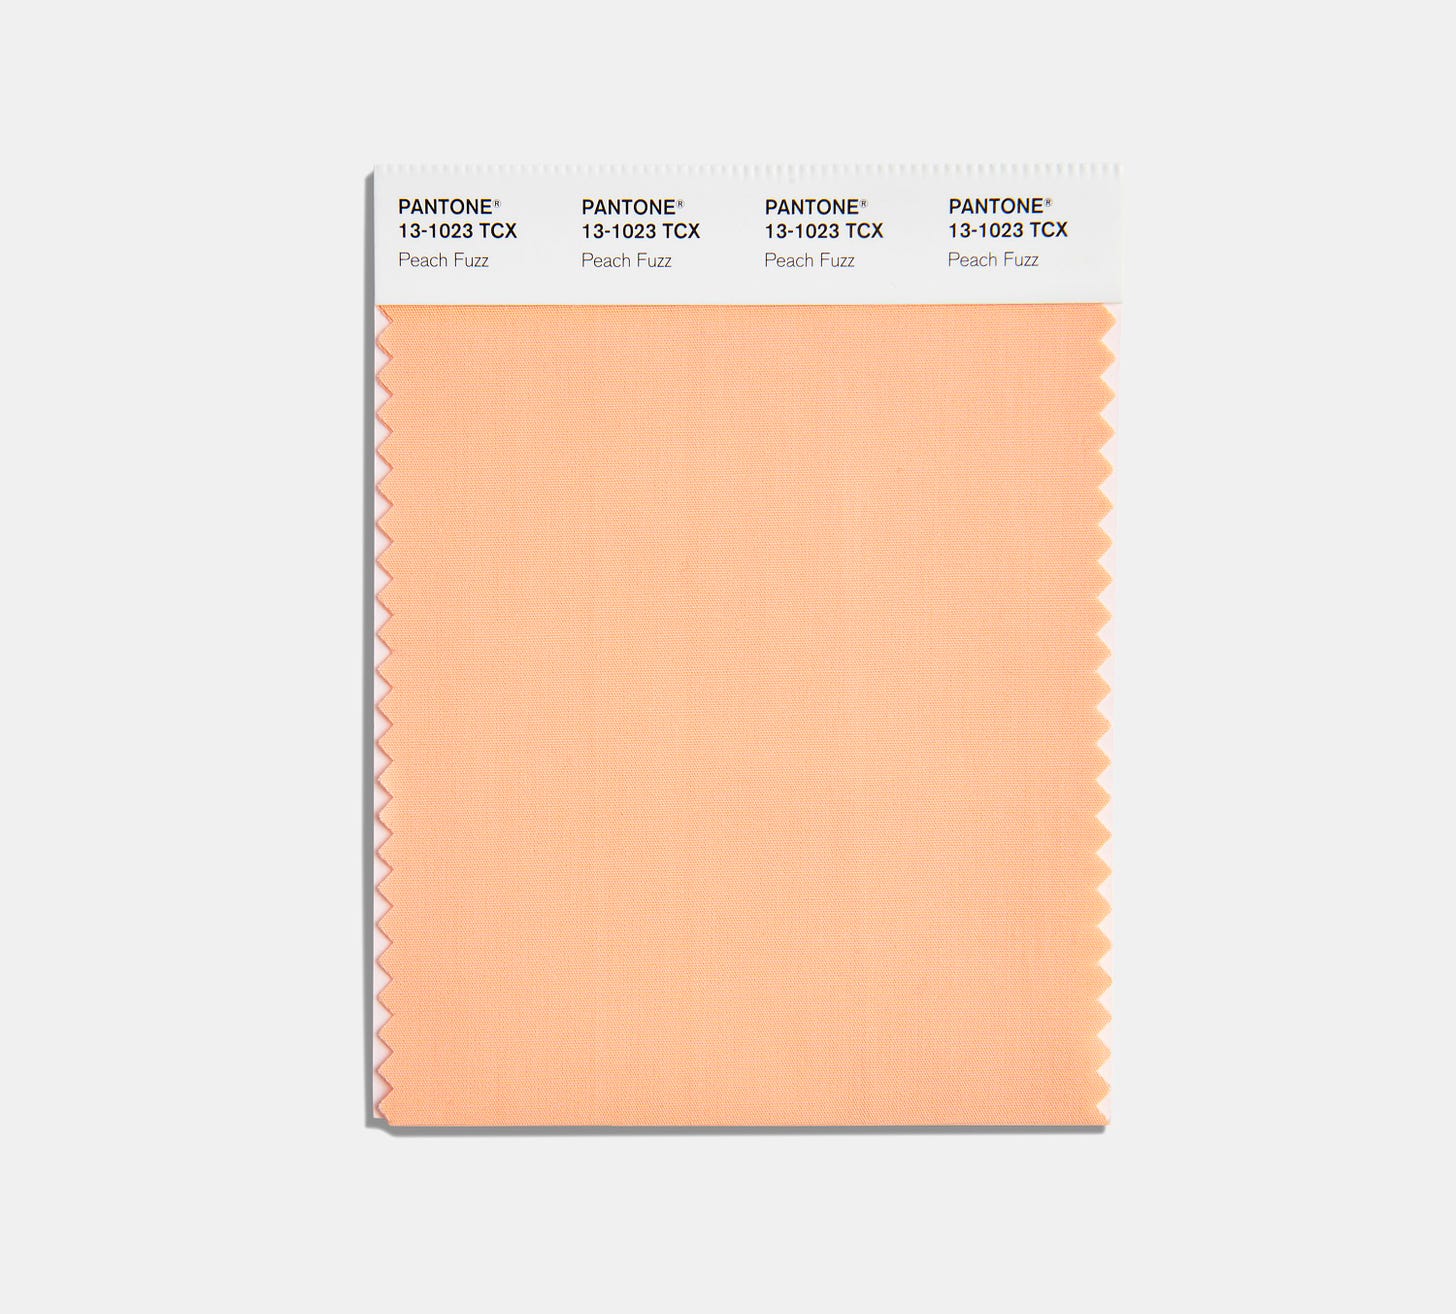 Pantone's "Peach Fuzz" has been announced as the Color of the Year 2024.